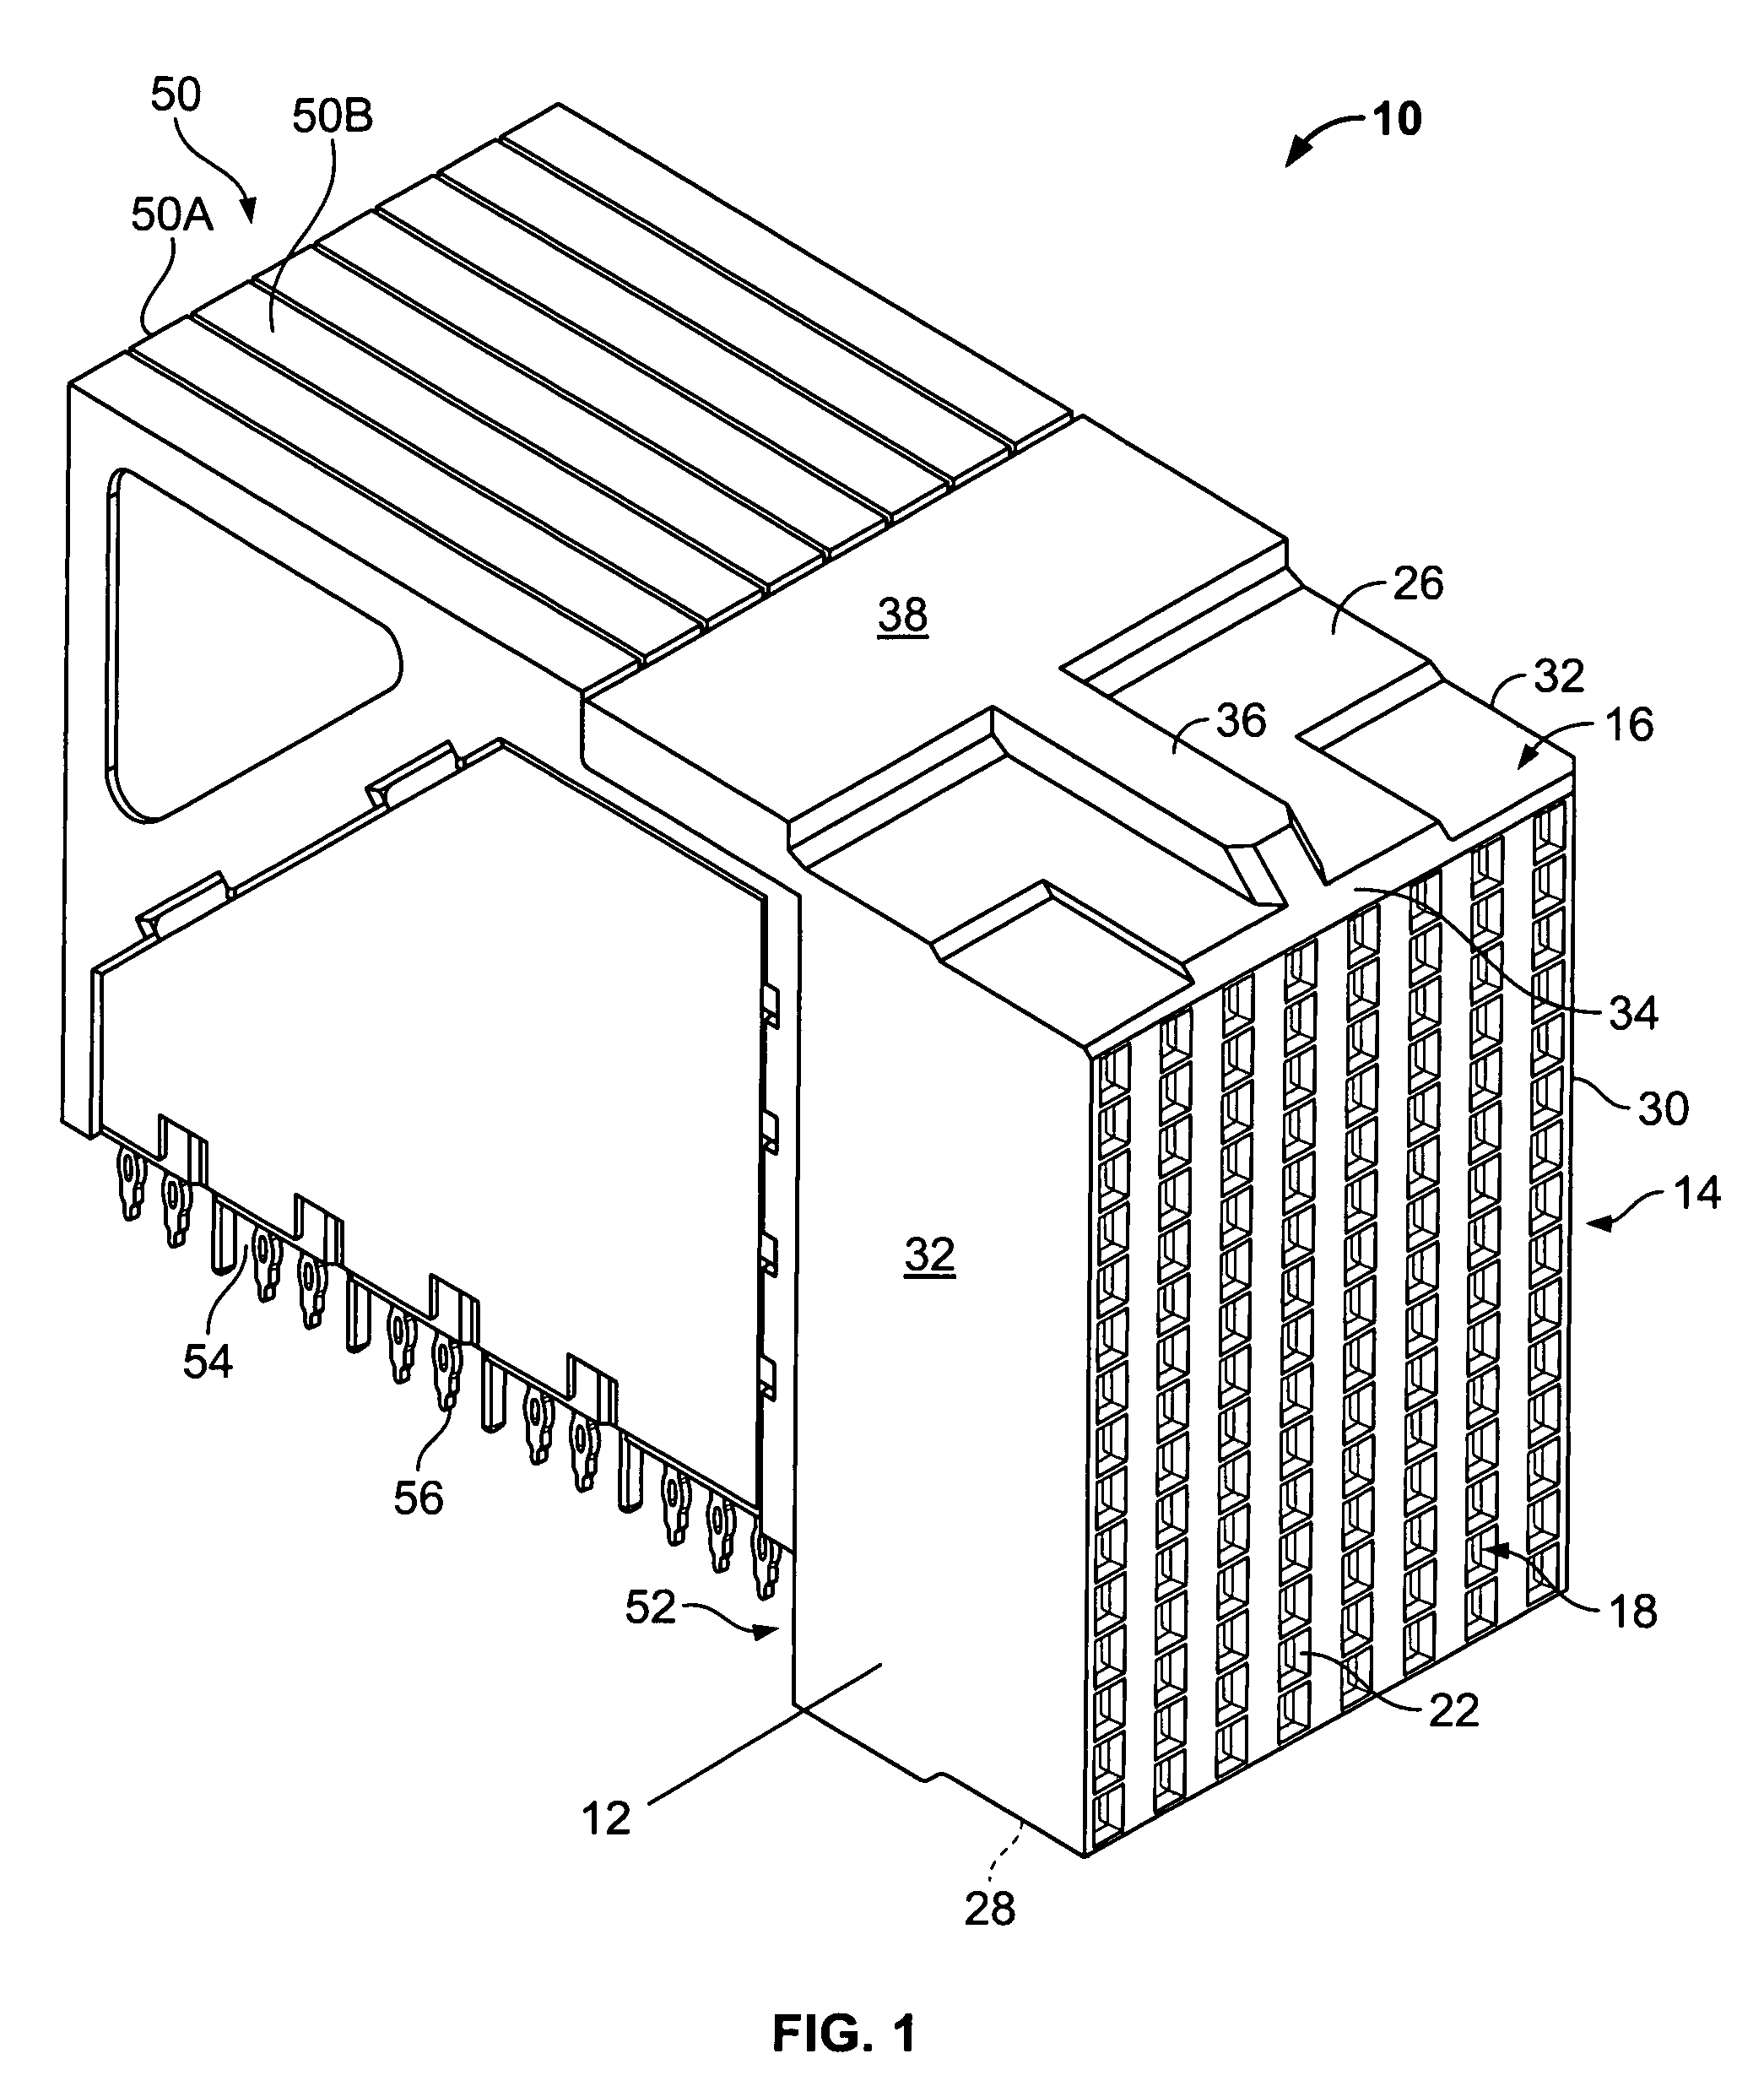 Skew controlled leadframe for a contact module assembly